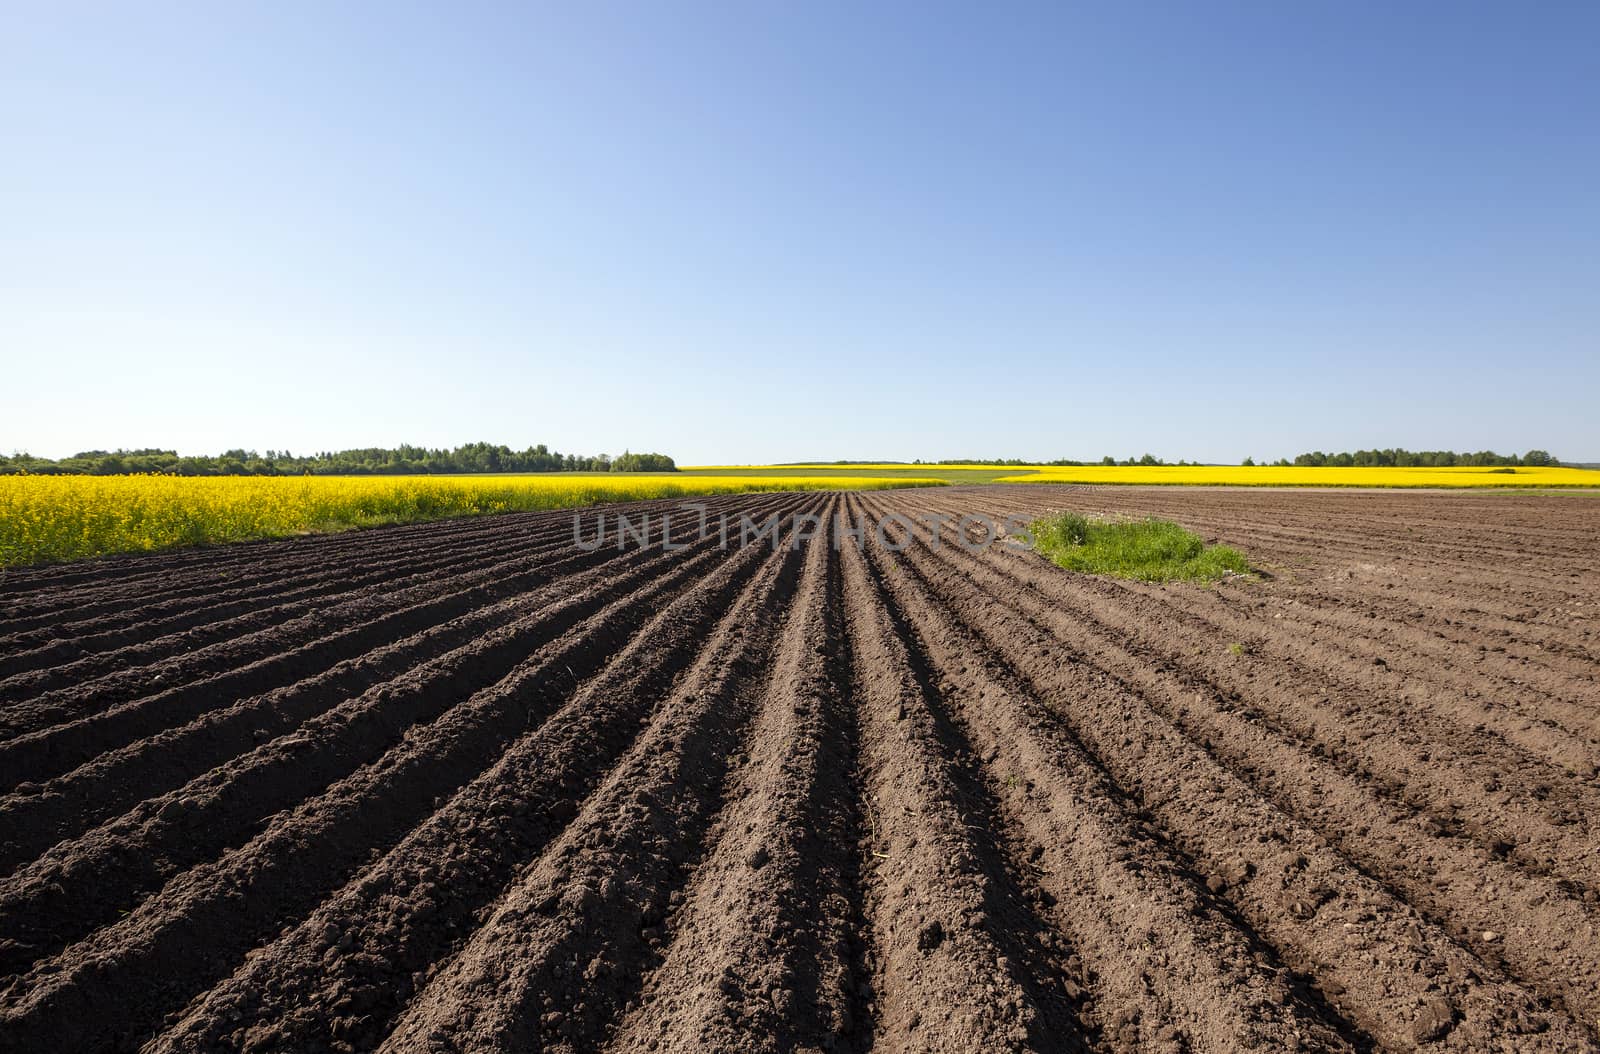   plowed agricultural field. Near growing canola. Blue sky.